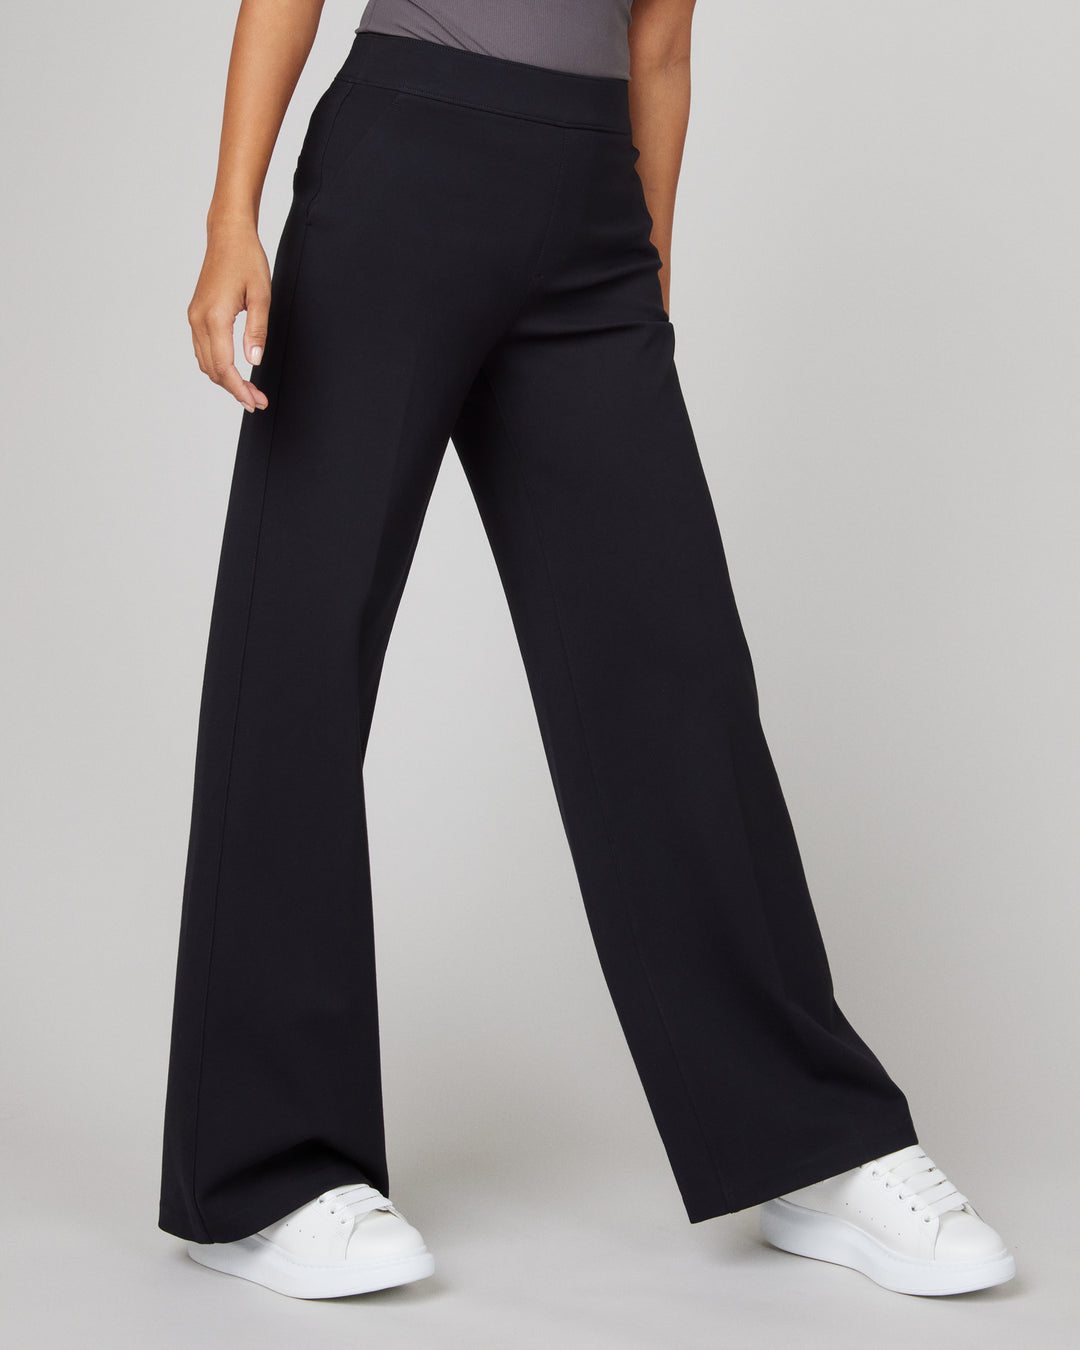 SPANX - Everyone needs a Perfect Black Pant. When we named